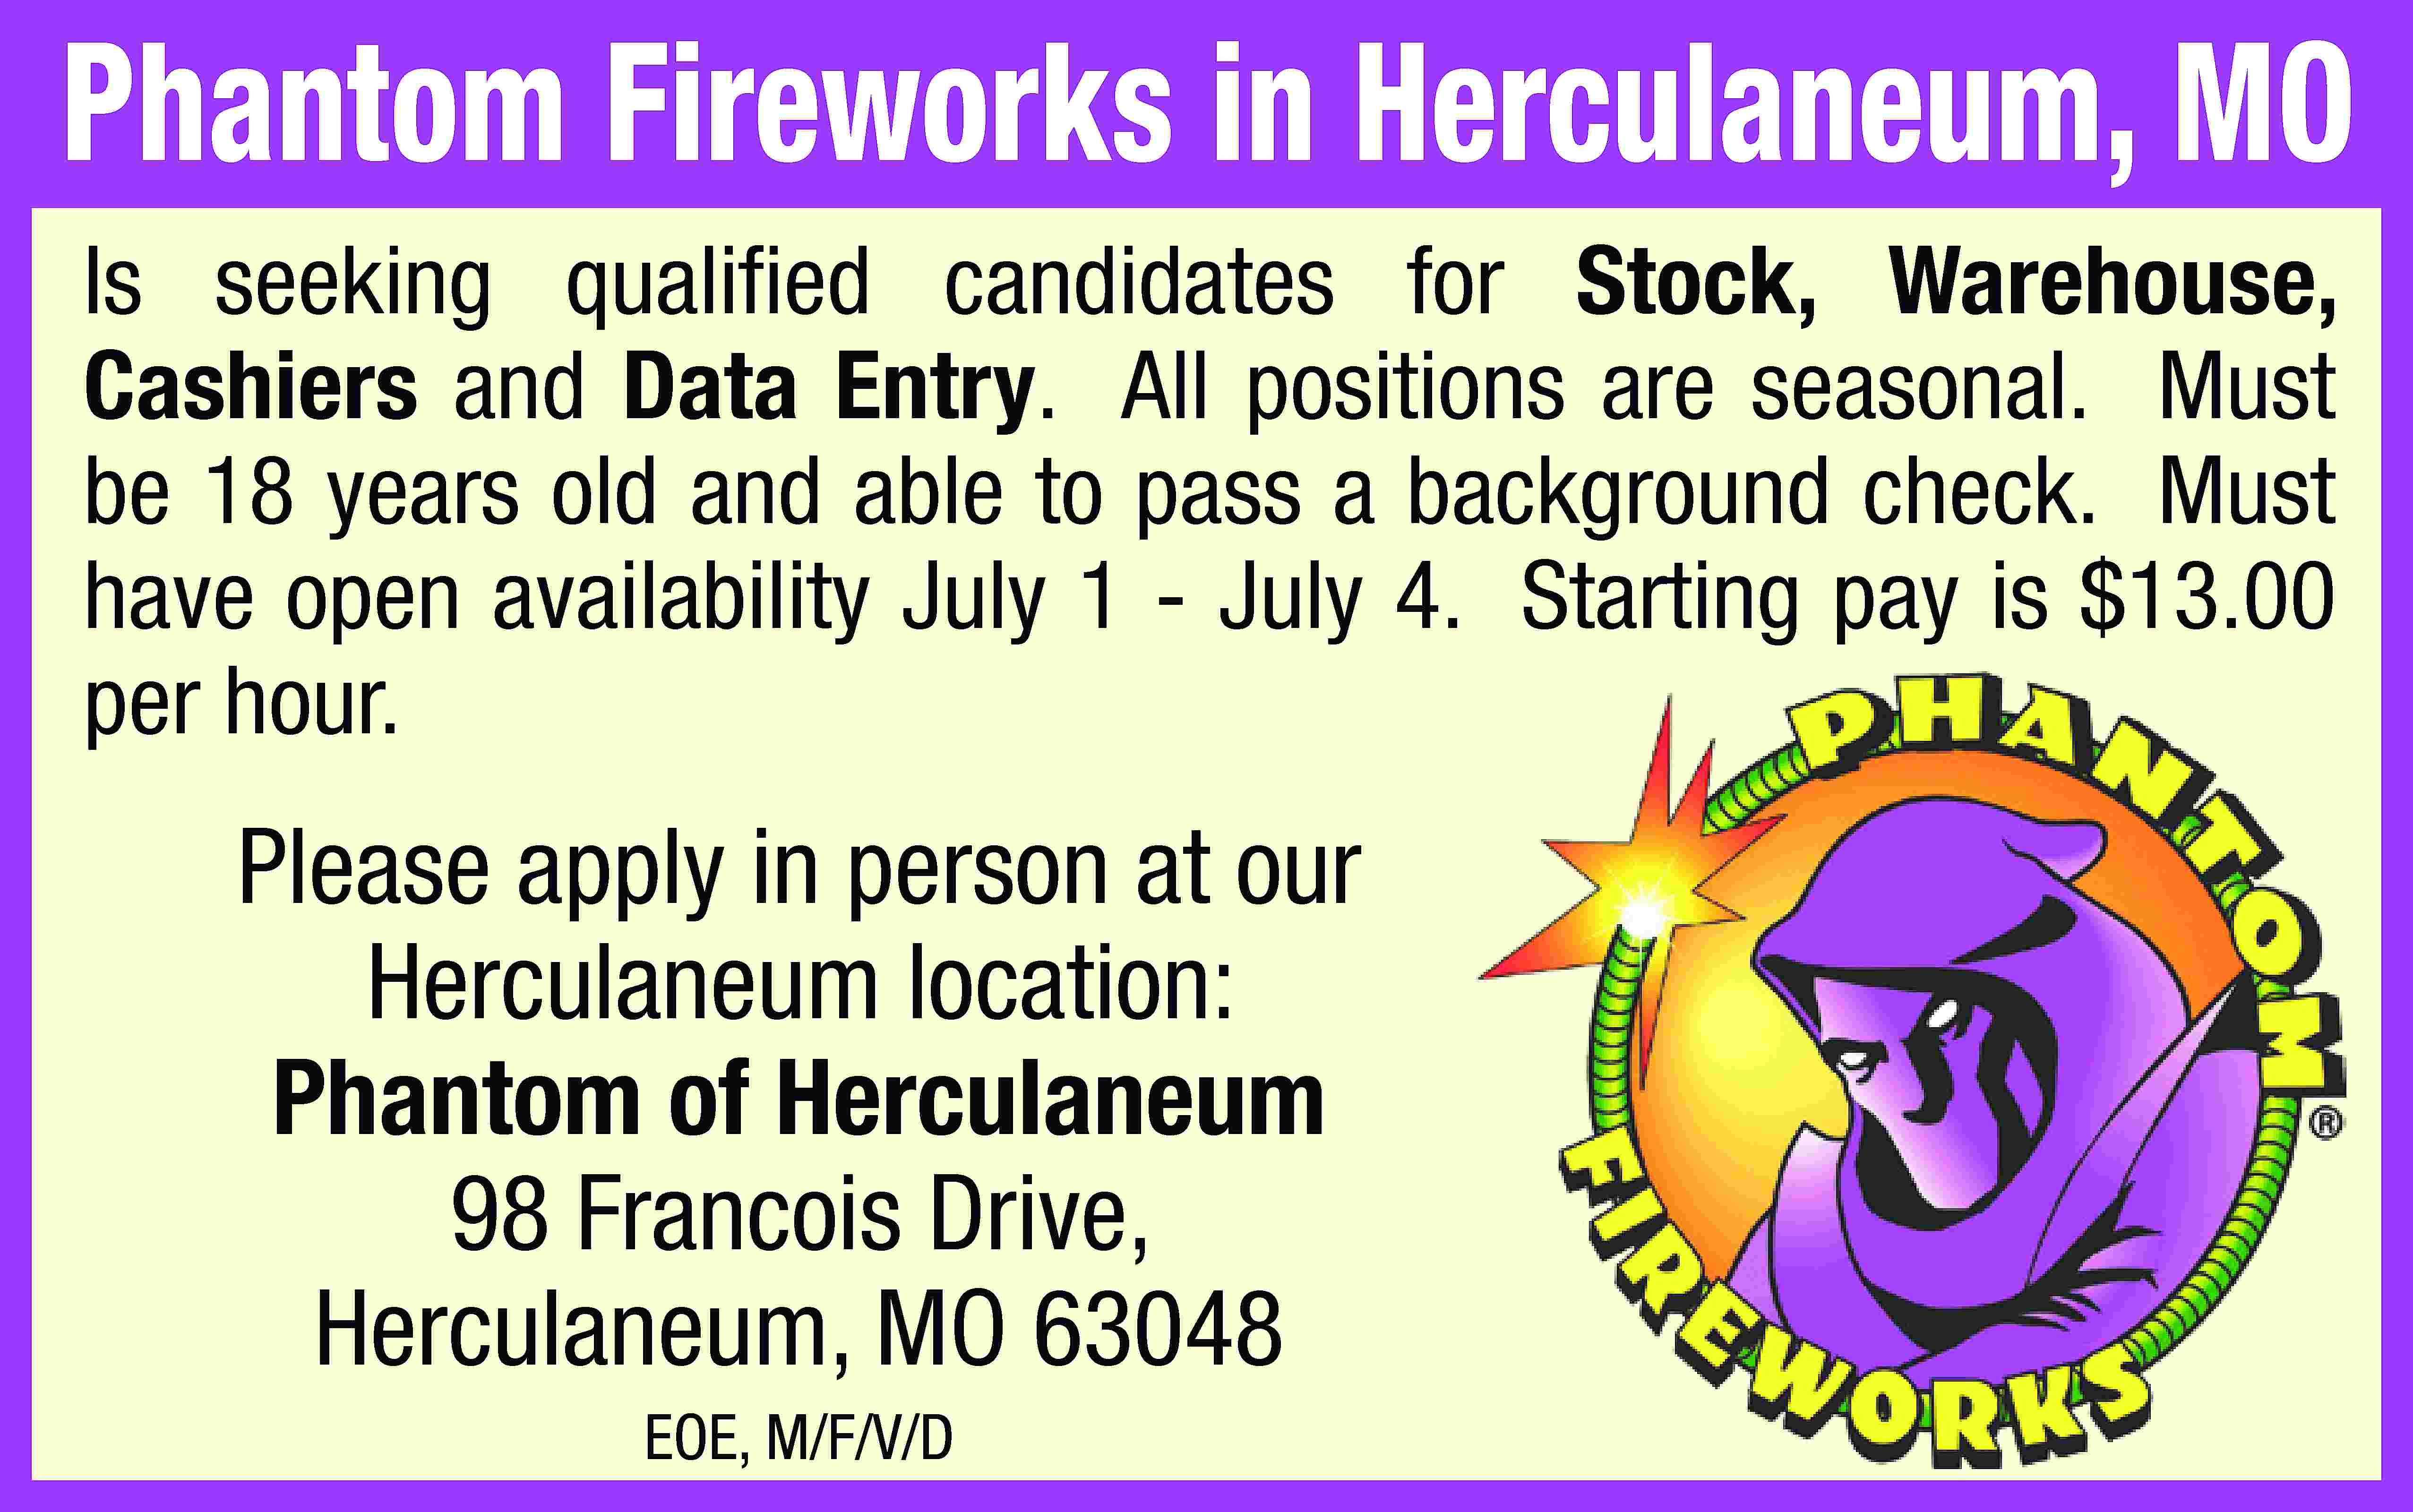 Phantom Fireworks in Herculaneum, MO  Phantom Fireworks in Herculaneum, MO Is seeking qualified candidates for Stock, Warehouse, Cashiers and Data Entry. All positions are seasonal. Must be 18 years old and able to pass a background check. Must have open availability July 1 - July 4. Starting pay is $13.00 per hour. Please apply in person at our Herculaneum location: Phantom of Herculaneum 98 Francois Drive, Herculaneum, MO 63048 EOE, M/F/V/D